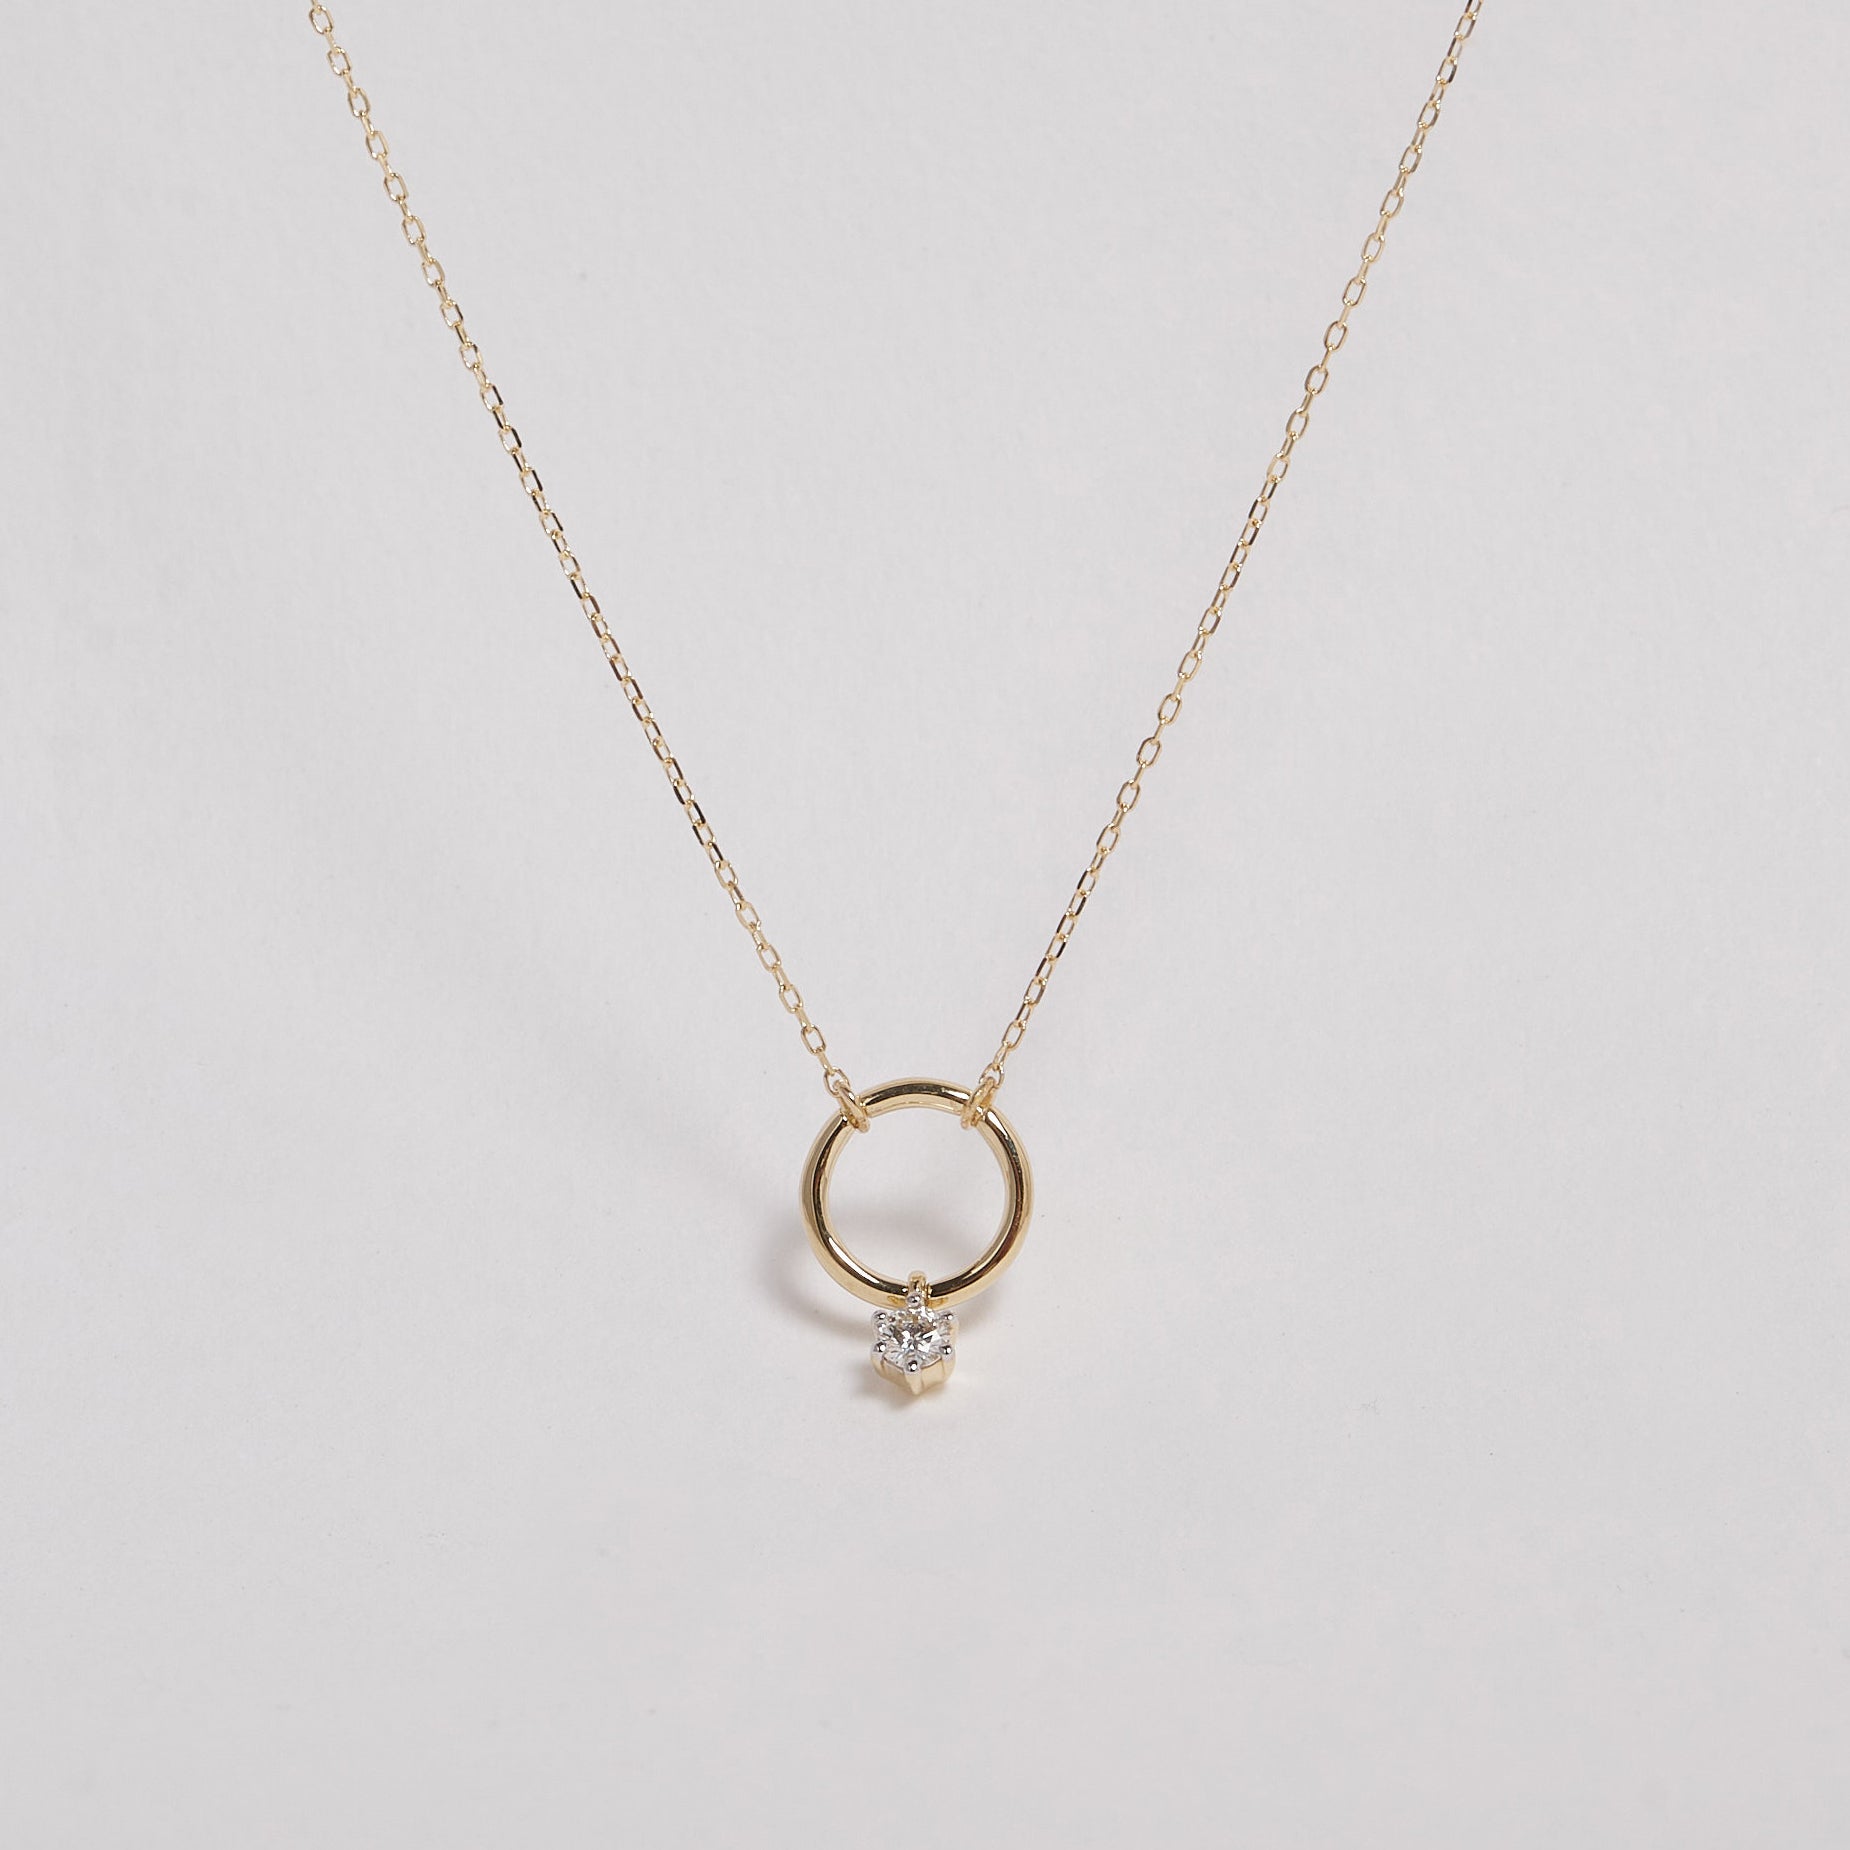 Kindred 9ct Yellow Gold Diamond Necklace